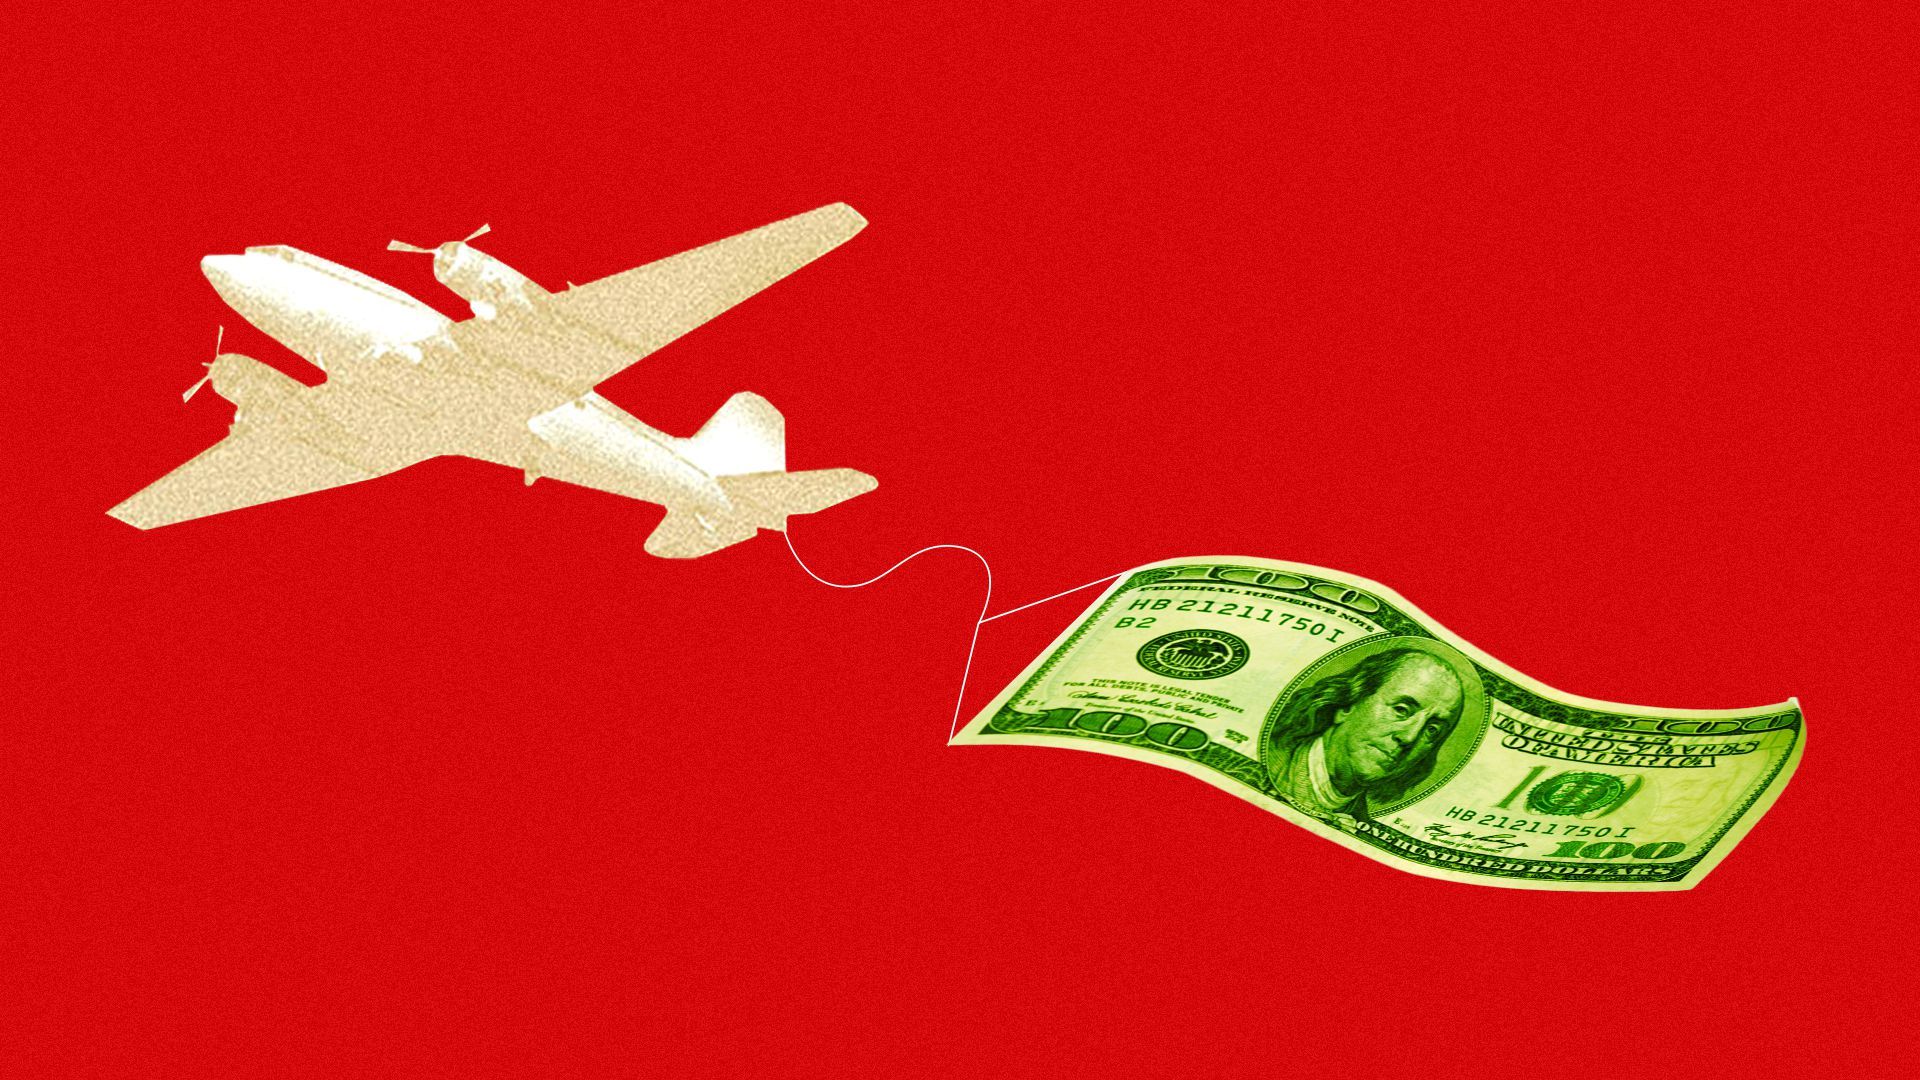 Illustration of the Air Mail logo's plane flying a one hundred dollar bill banner